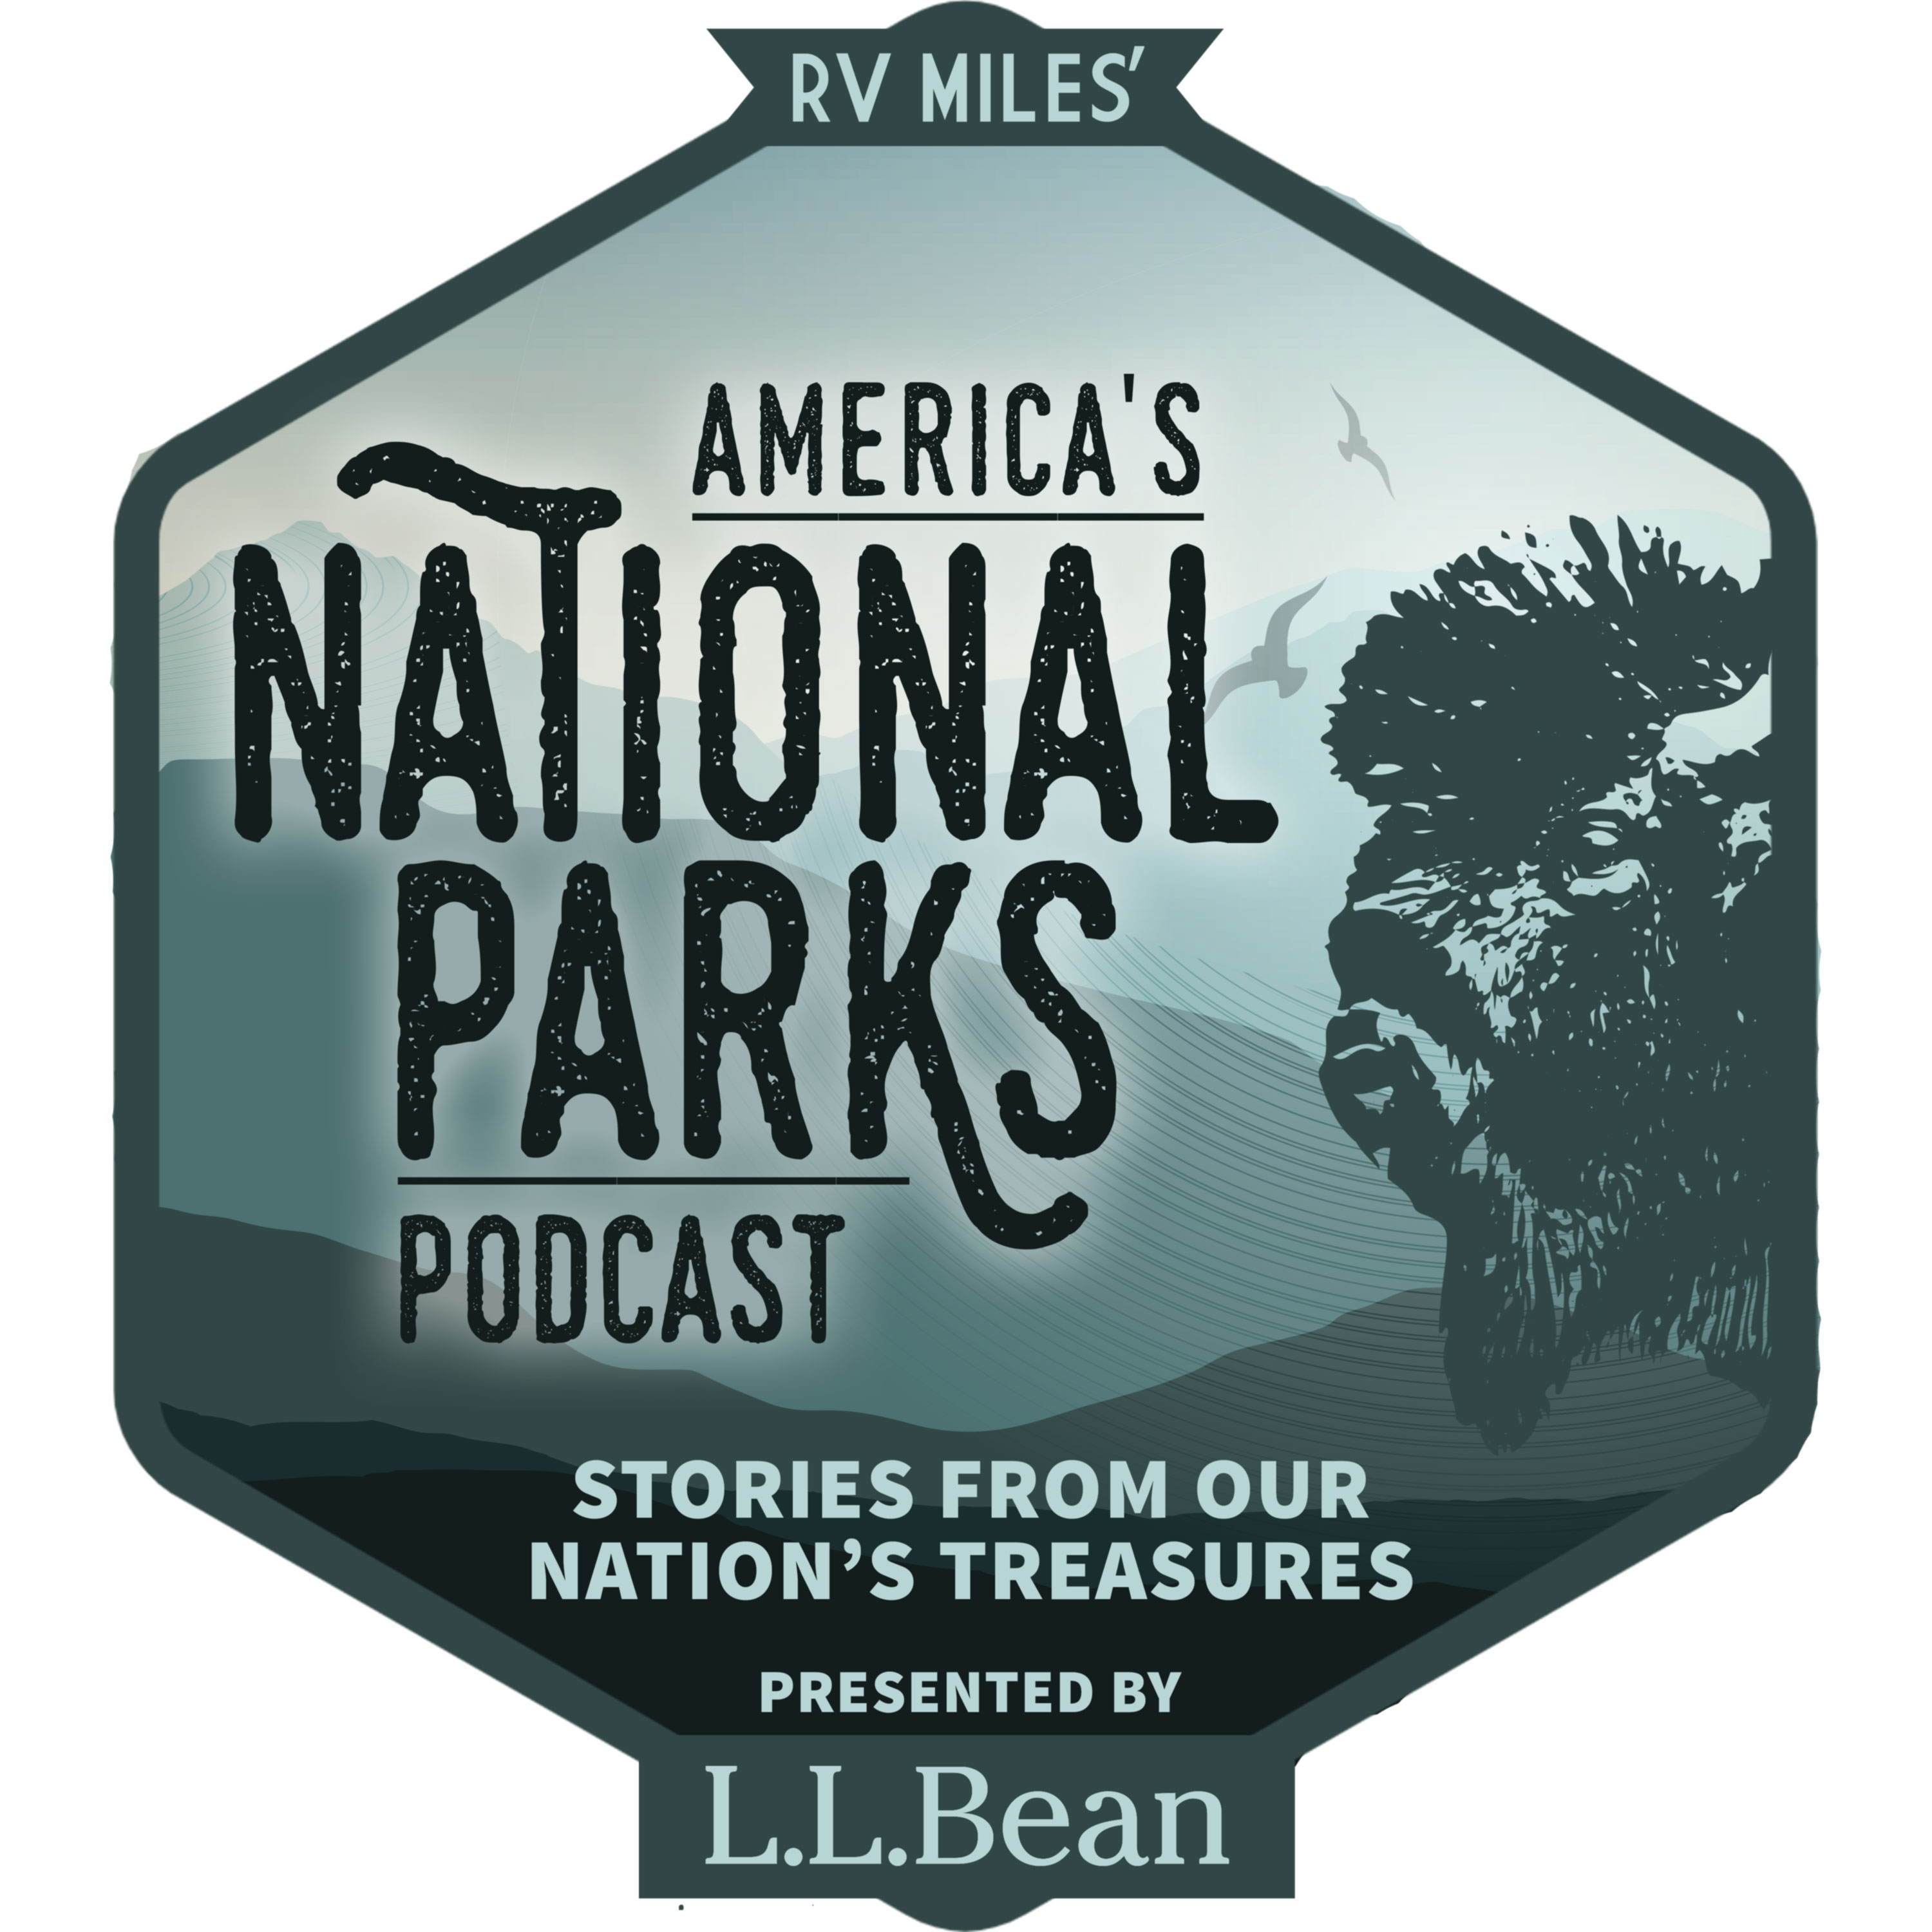 America's National Parks Podcast podcast show image